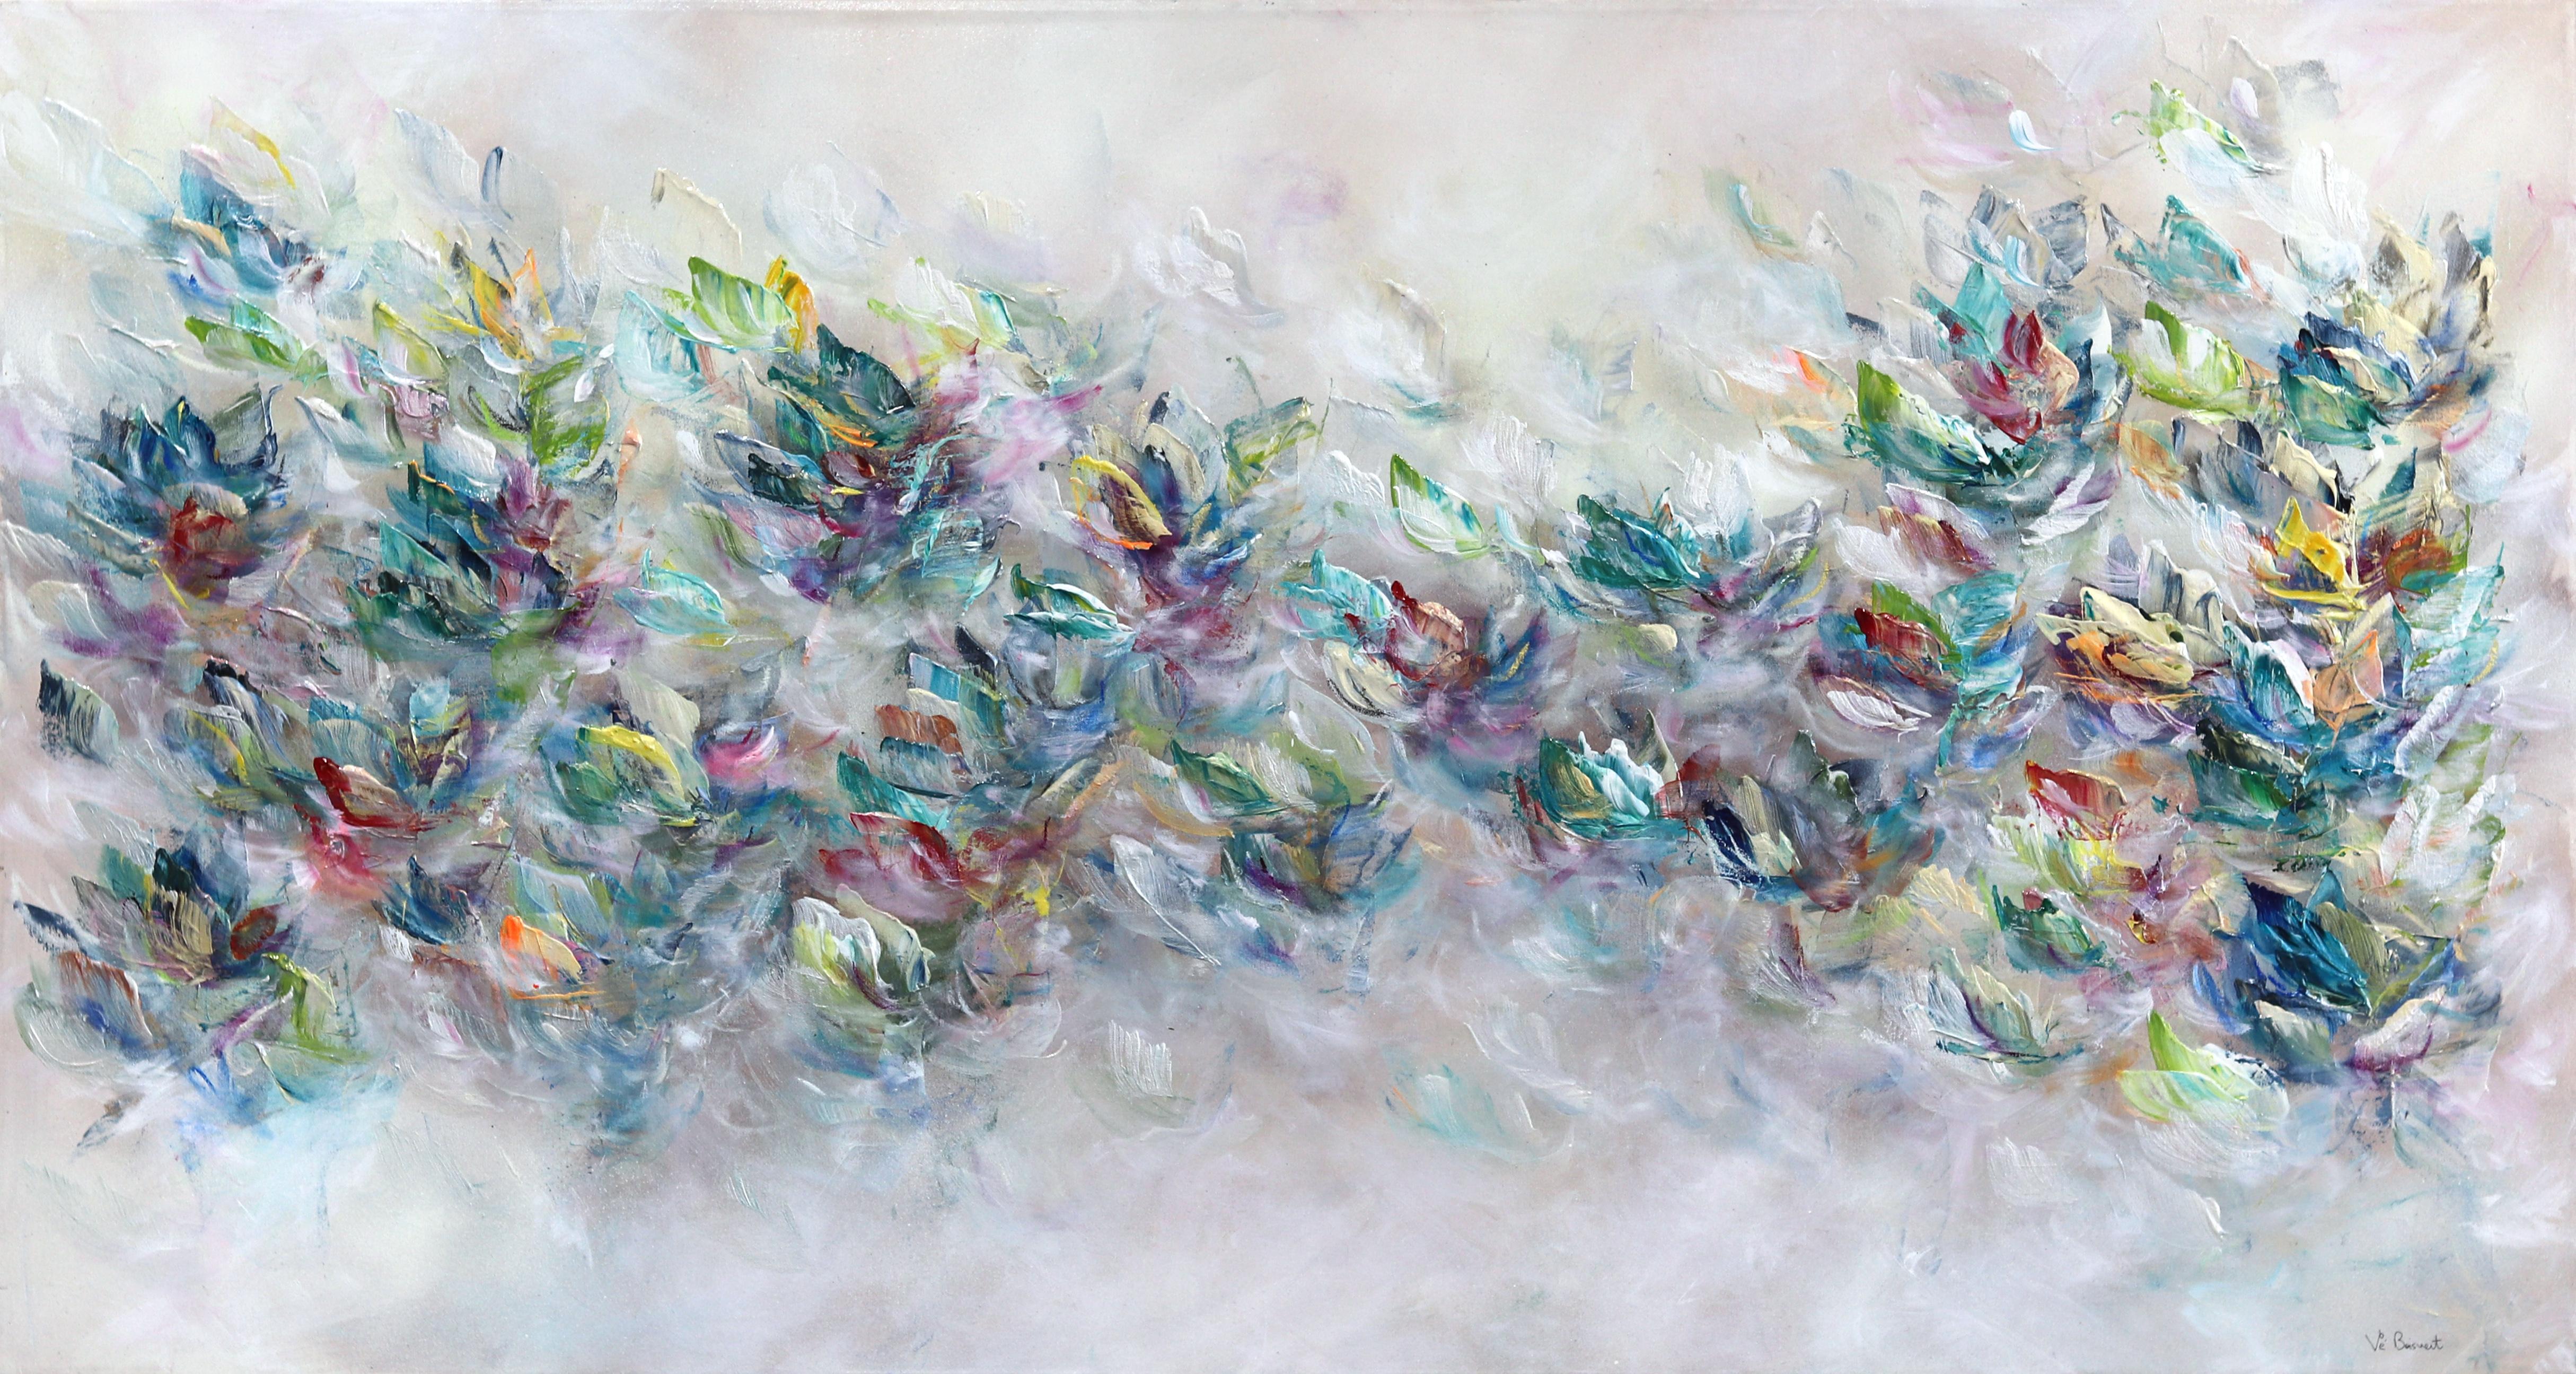 Vè Boisvert Abstract Painting - Tales of Flying and Adventures - Soft Abstract Floral Landscape Painting